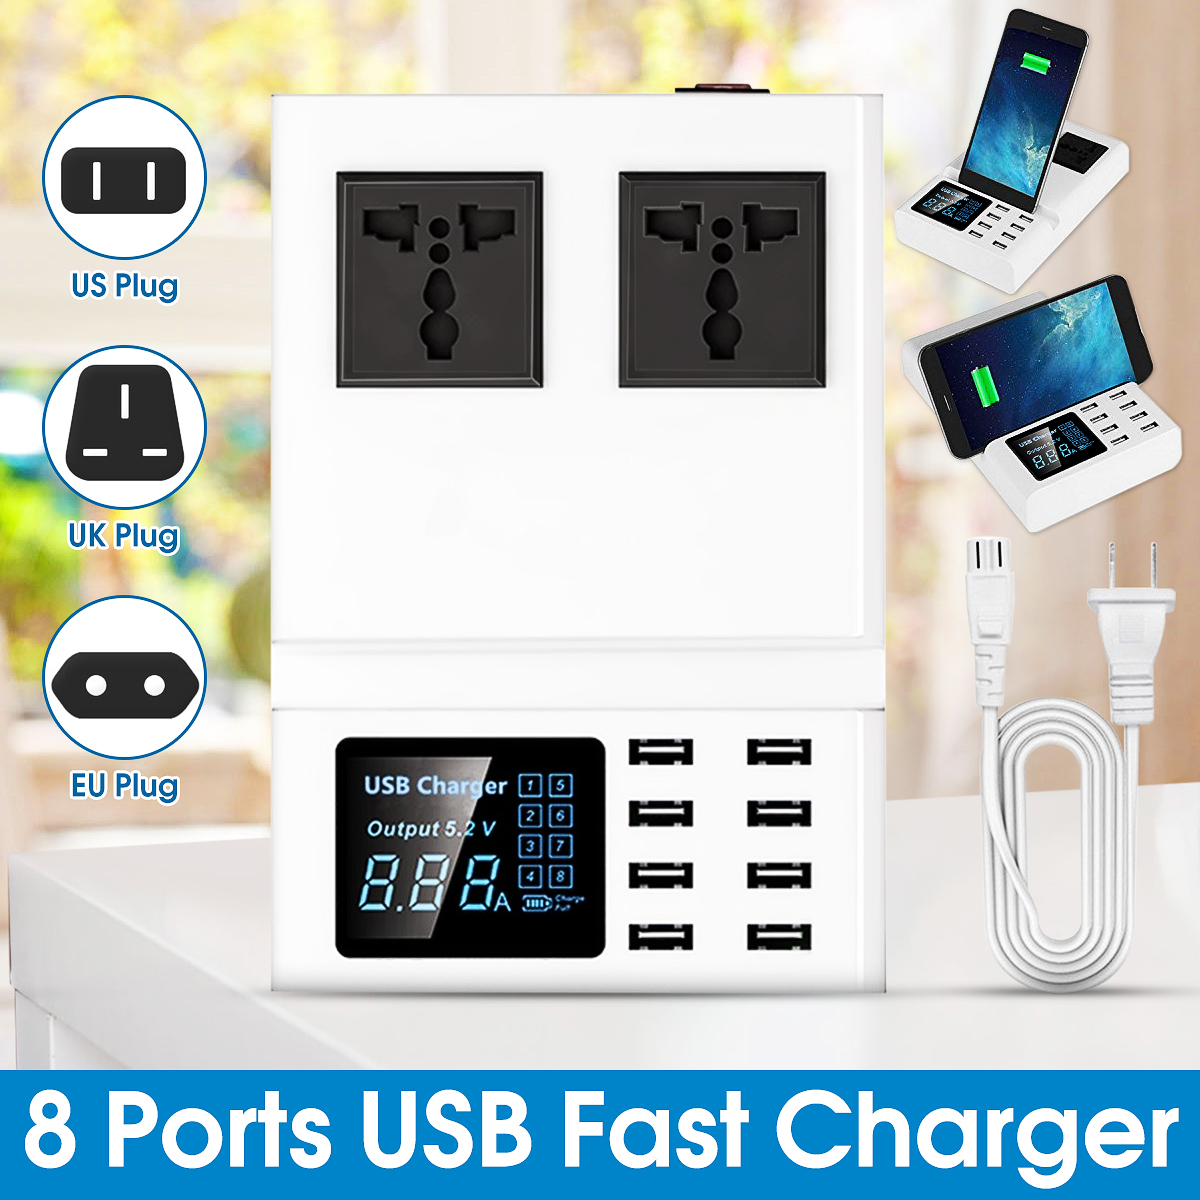 8-Ports-USB-Charger-with-2-AC-Outlets-Blue-LCD-Display-Screen-1585495-1